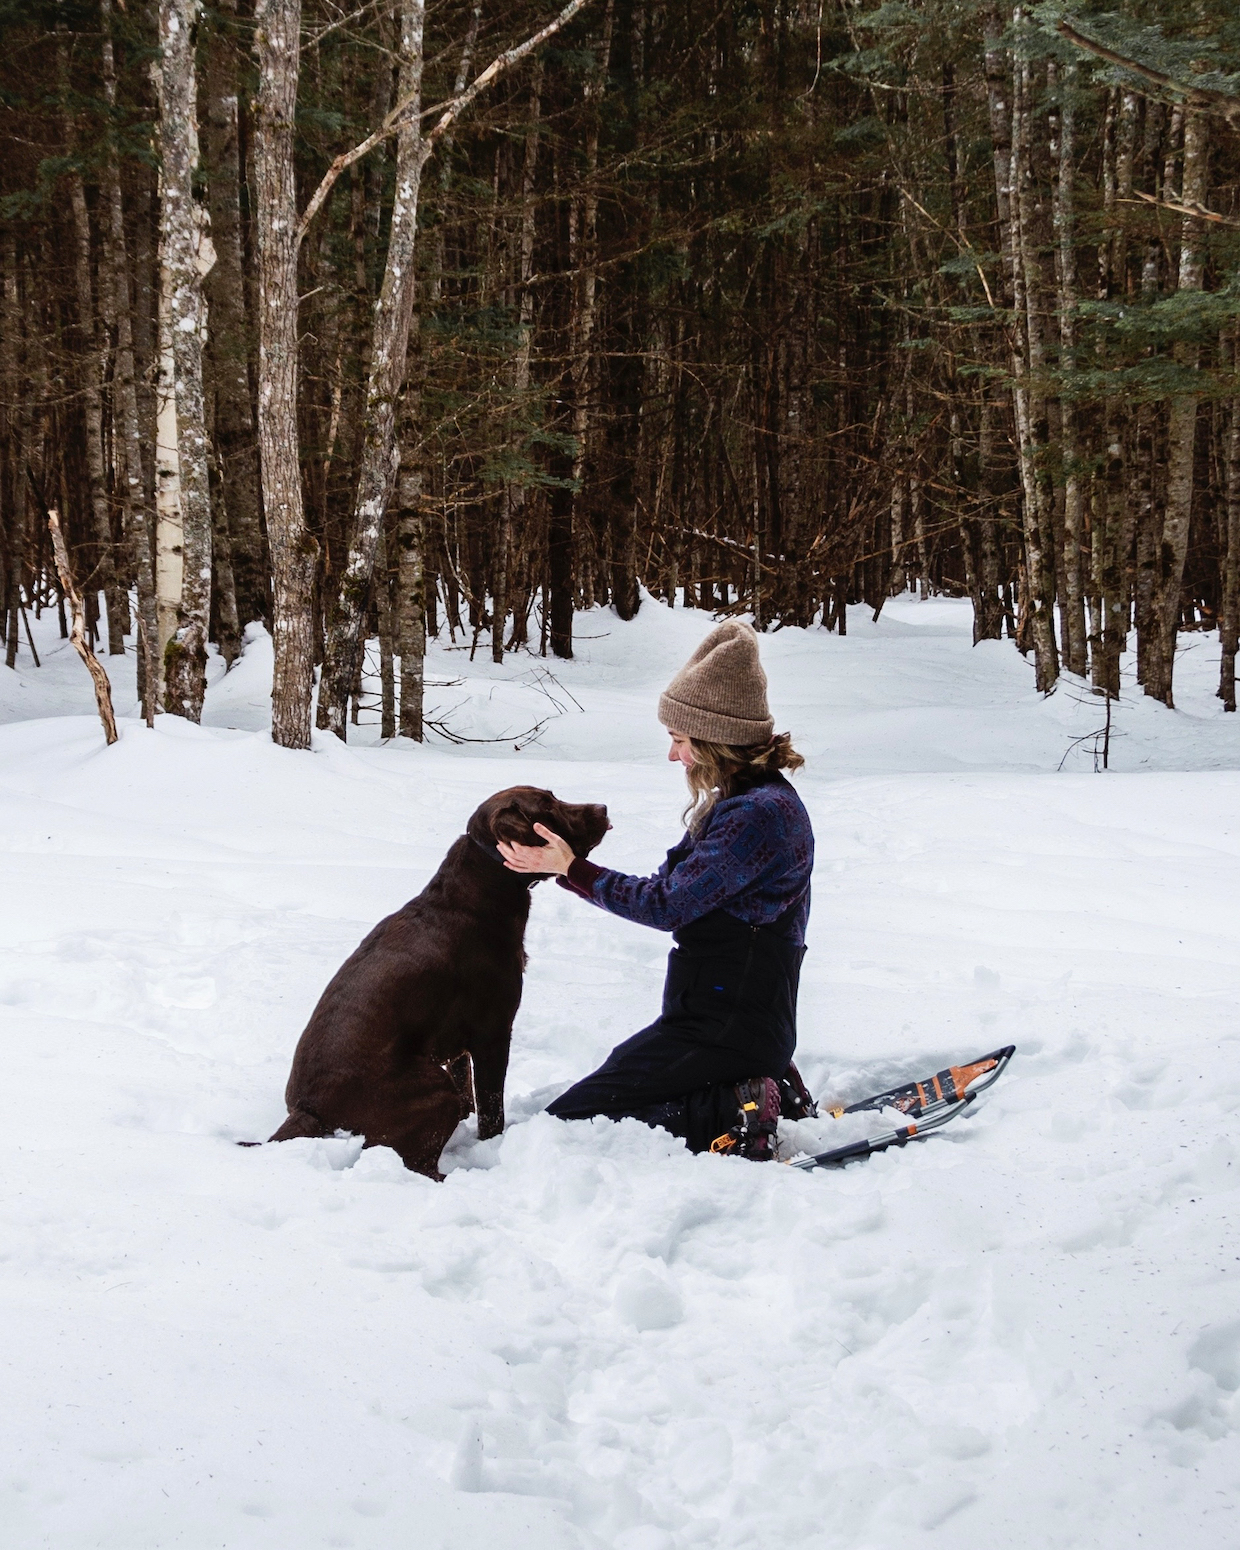 Jen and her dog, Moose, on a snowshoe together. She bends down on her knees to pet him. Solo hiking, or snowshoeing, can be less lonely with a dog.